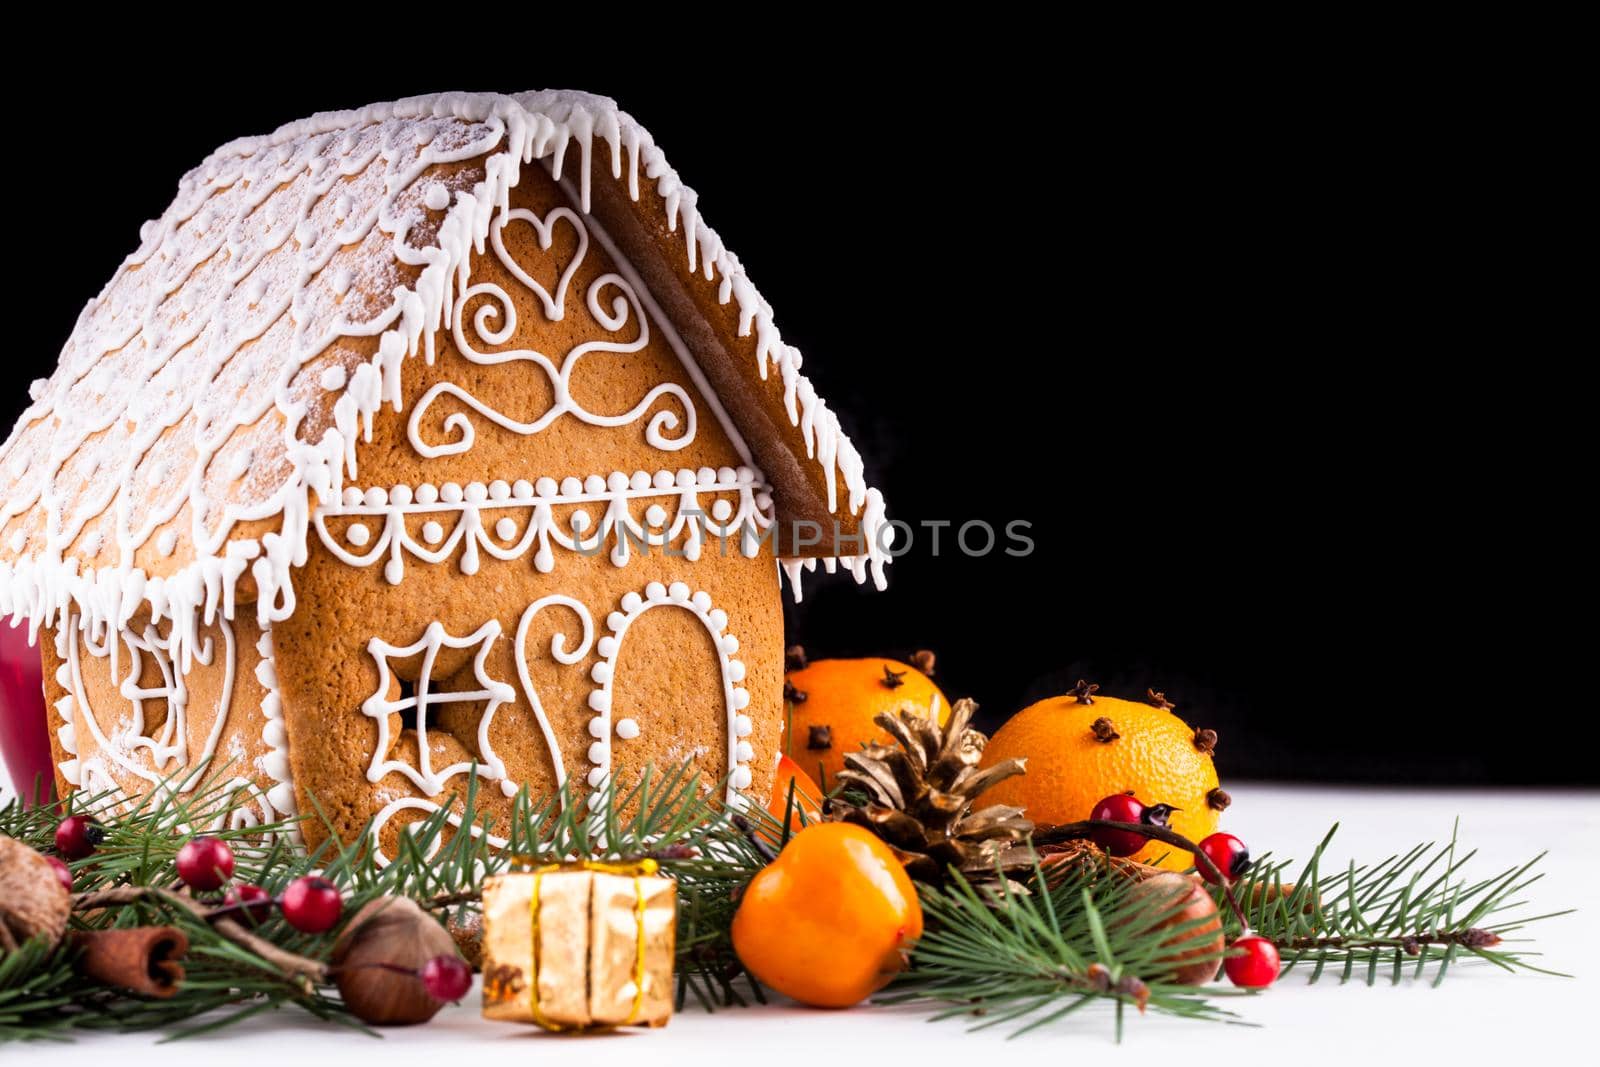 gingerbread house and decor by oksix